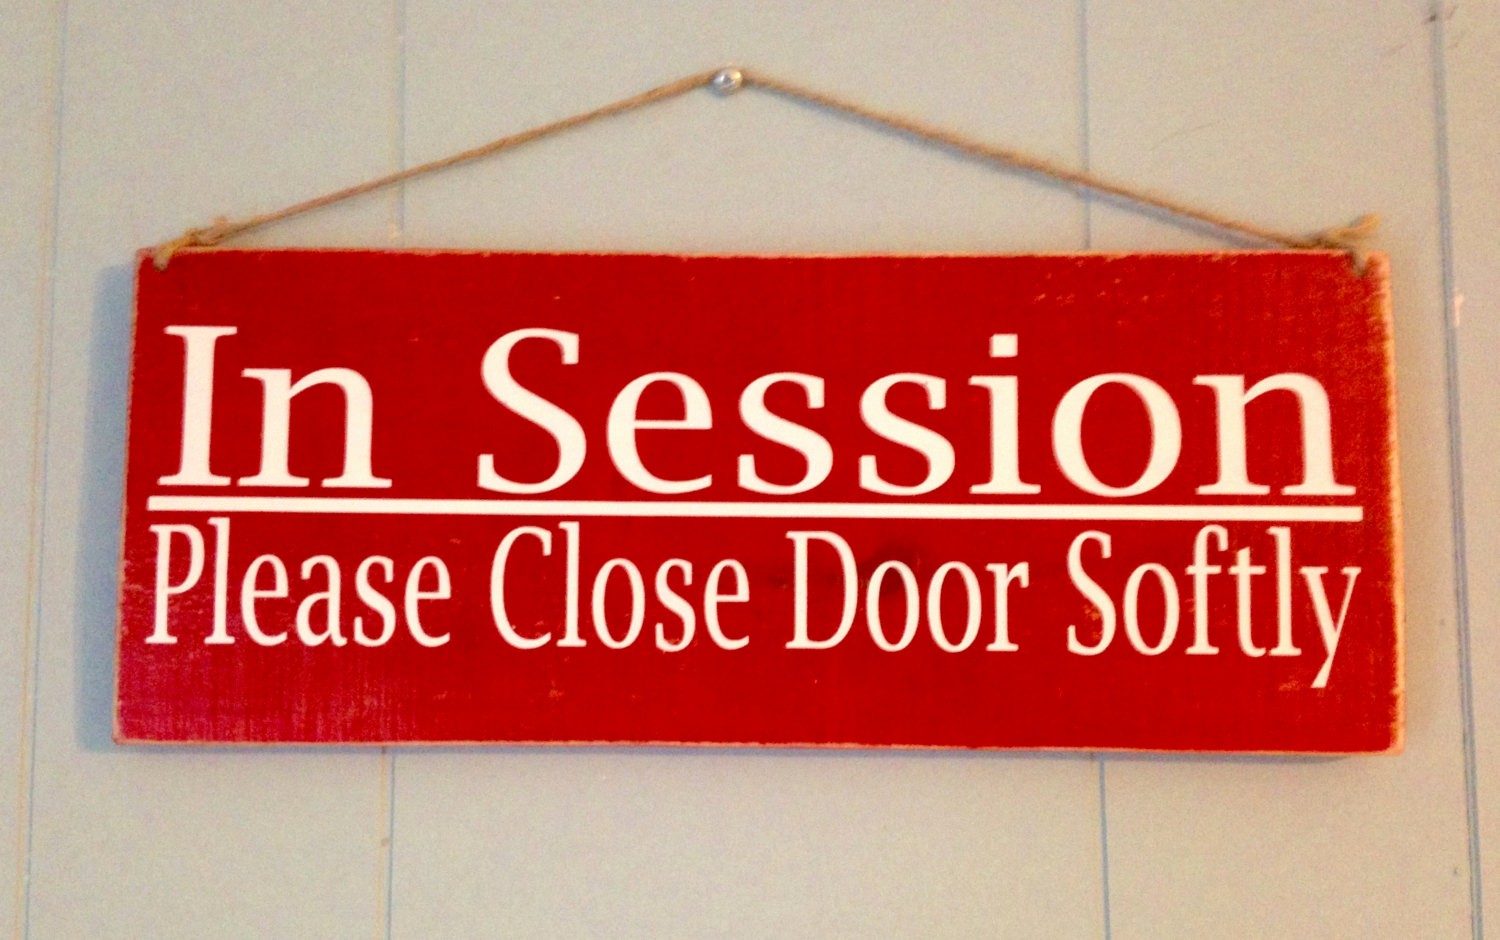 Meeting In Session Door Sign Best Of 12x4 In Session Please Close Door softly Choose Color Rustic